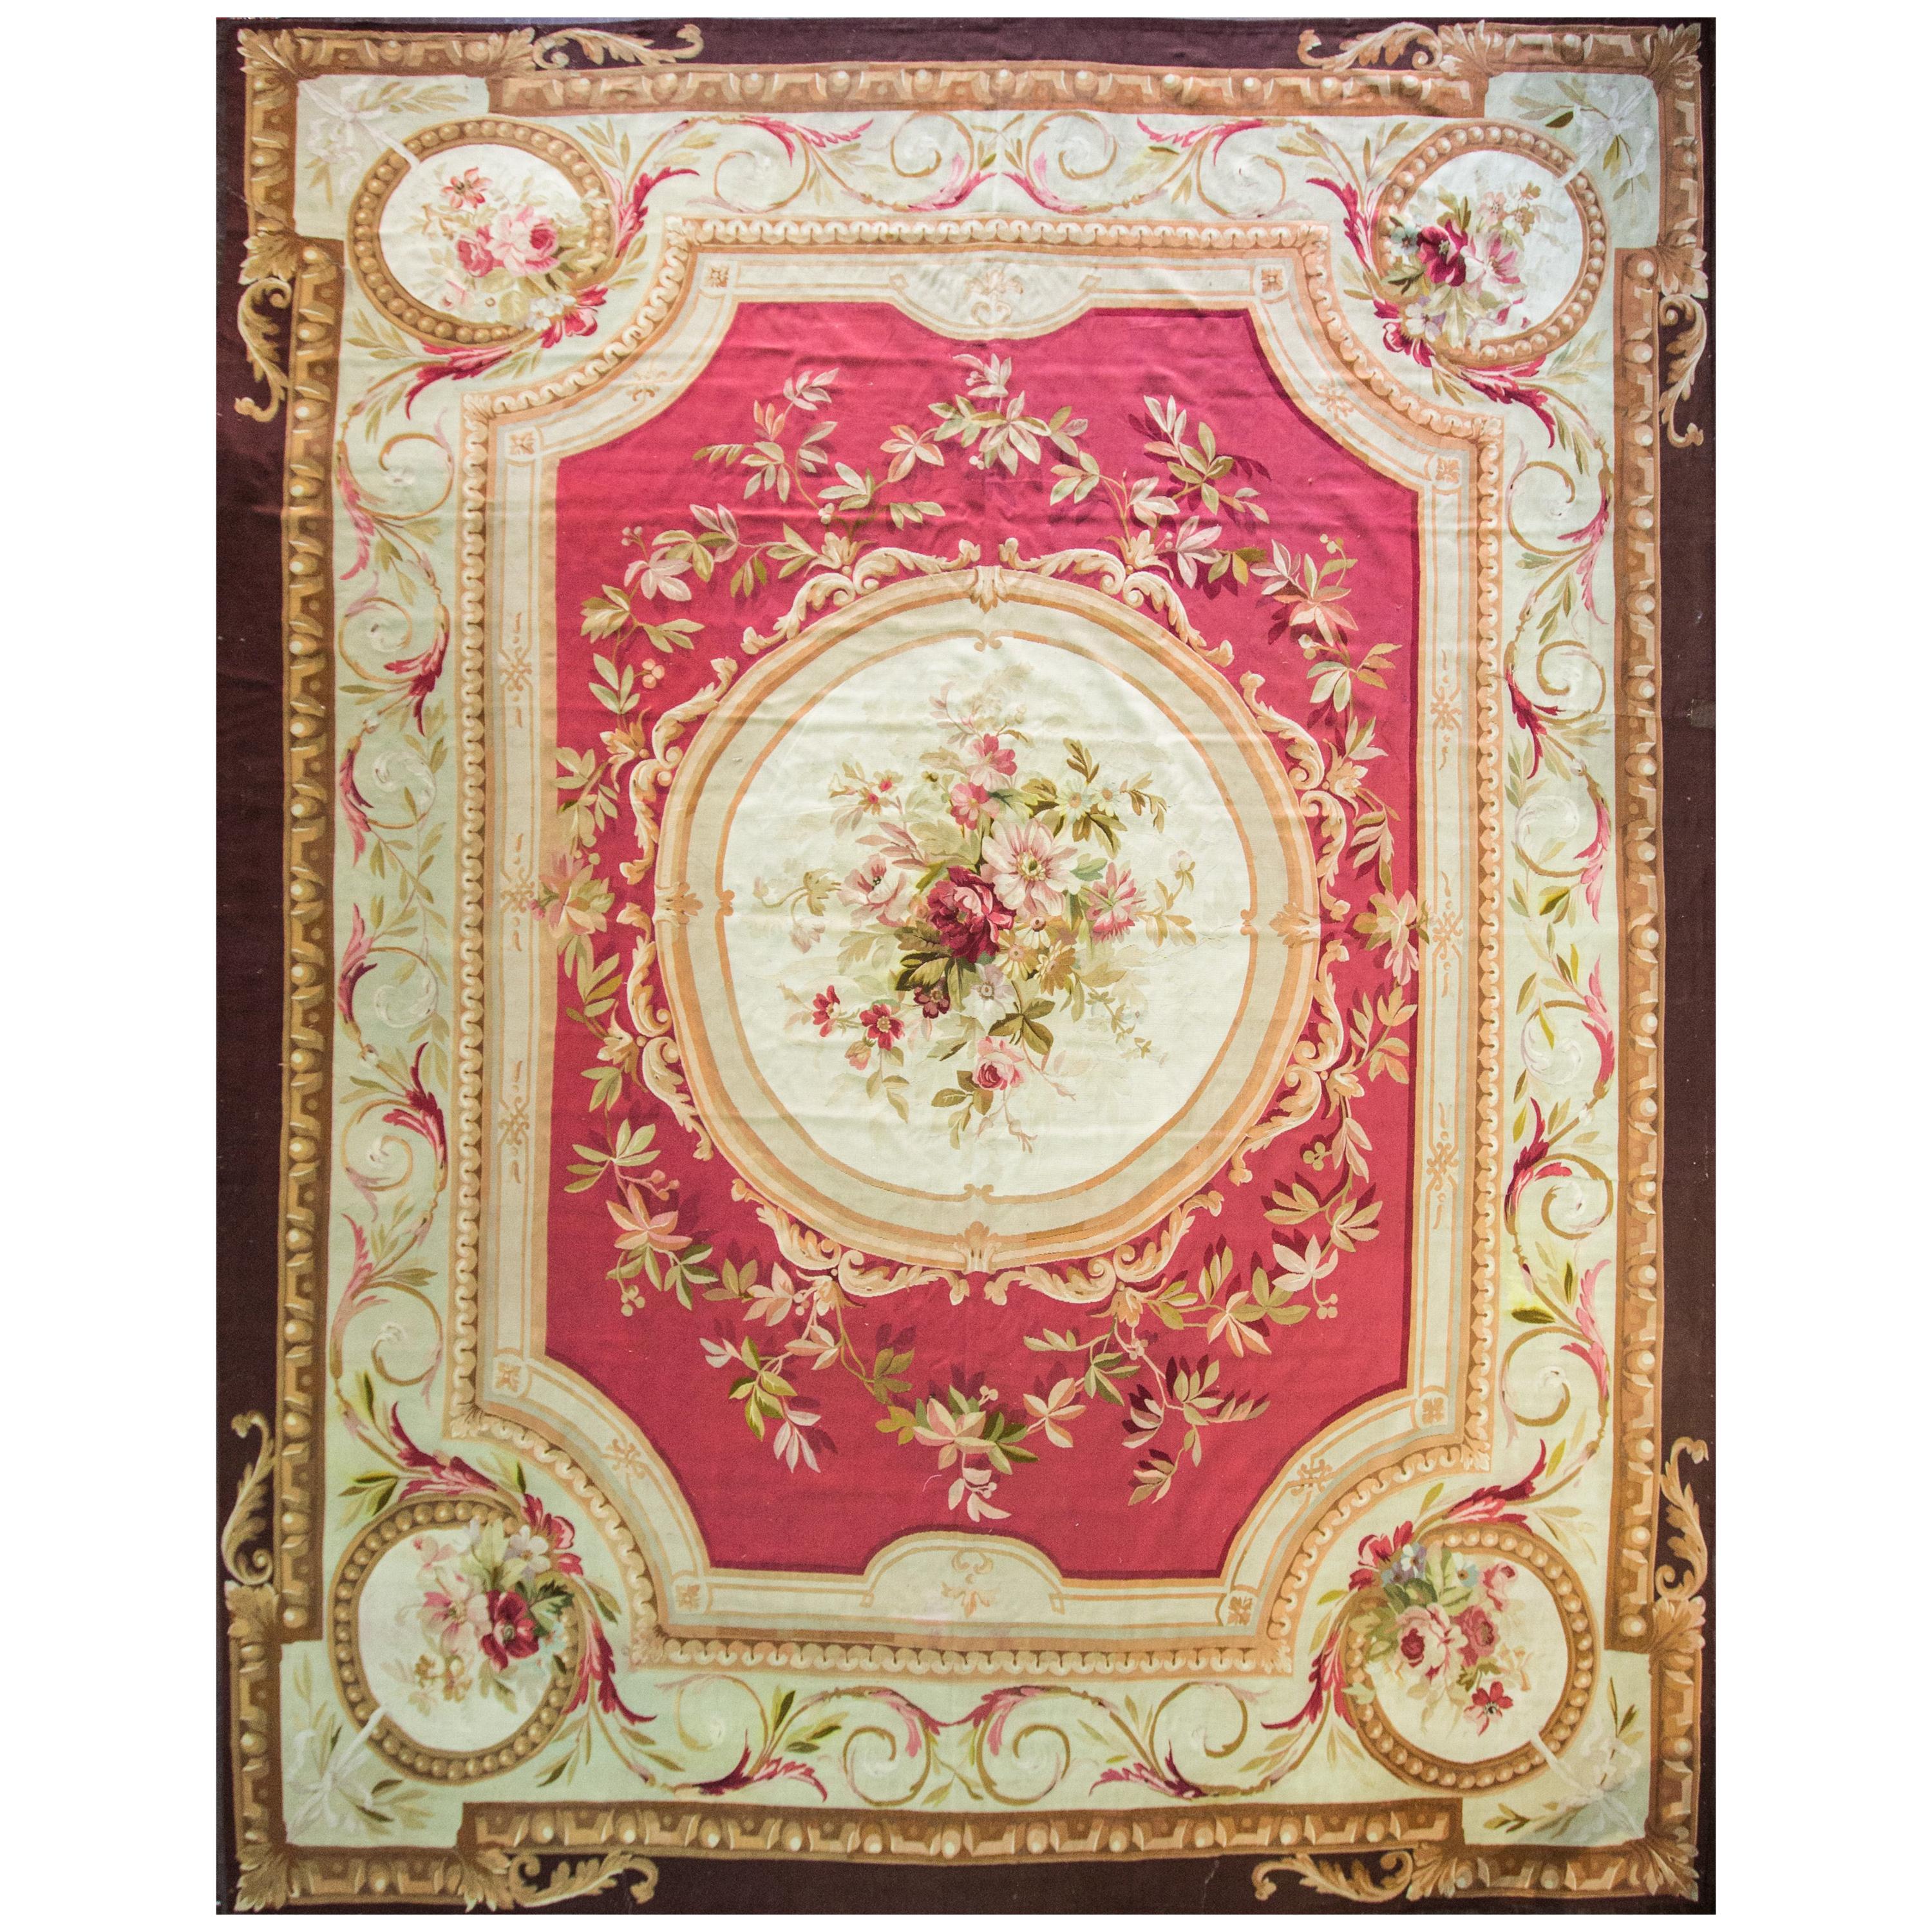 Antique French Aubusson Carpet 12'2" x 16', Fine Tapestry